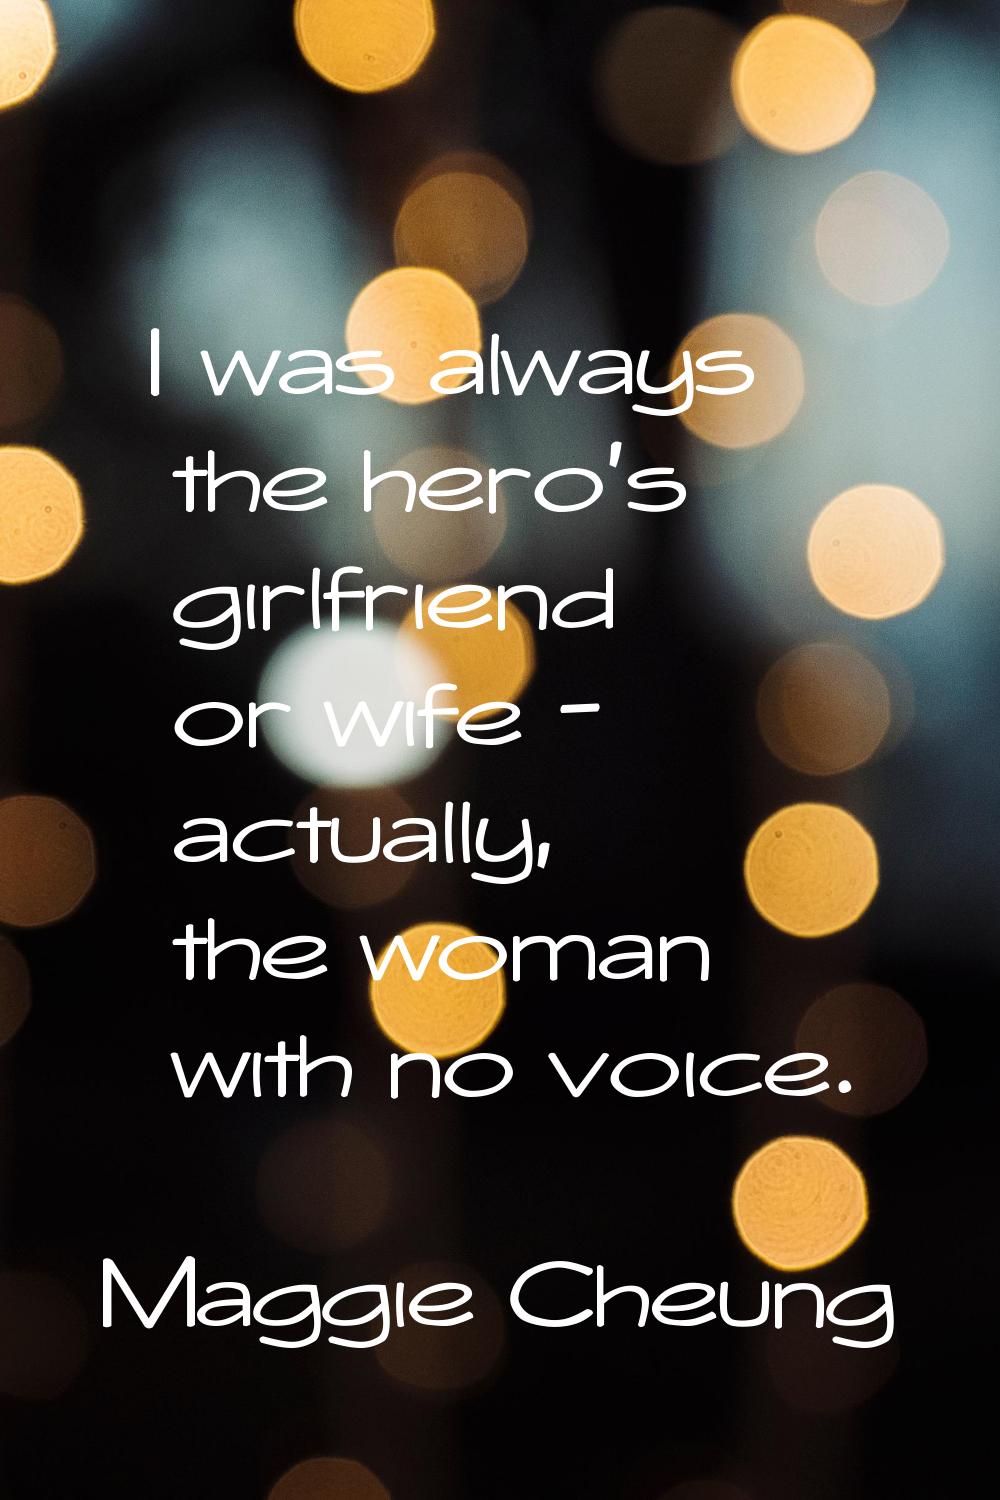 I was always the hero's girlfriend or wife - actually, the woman with no voice.